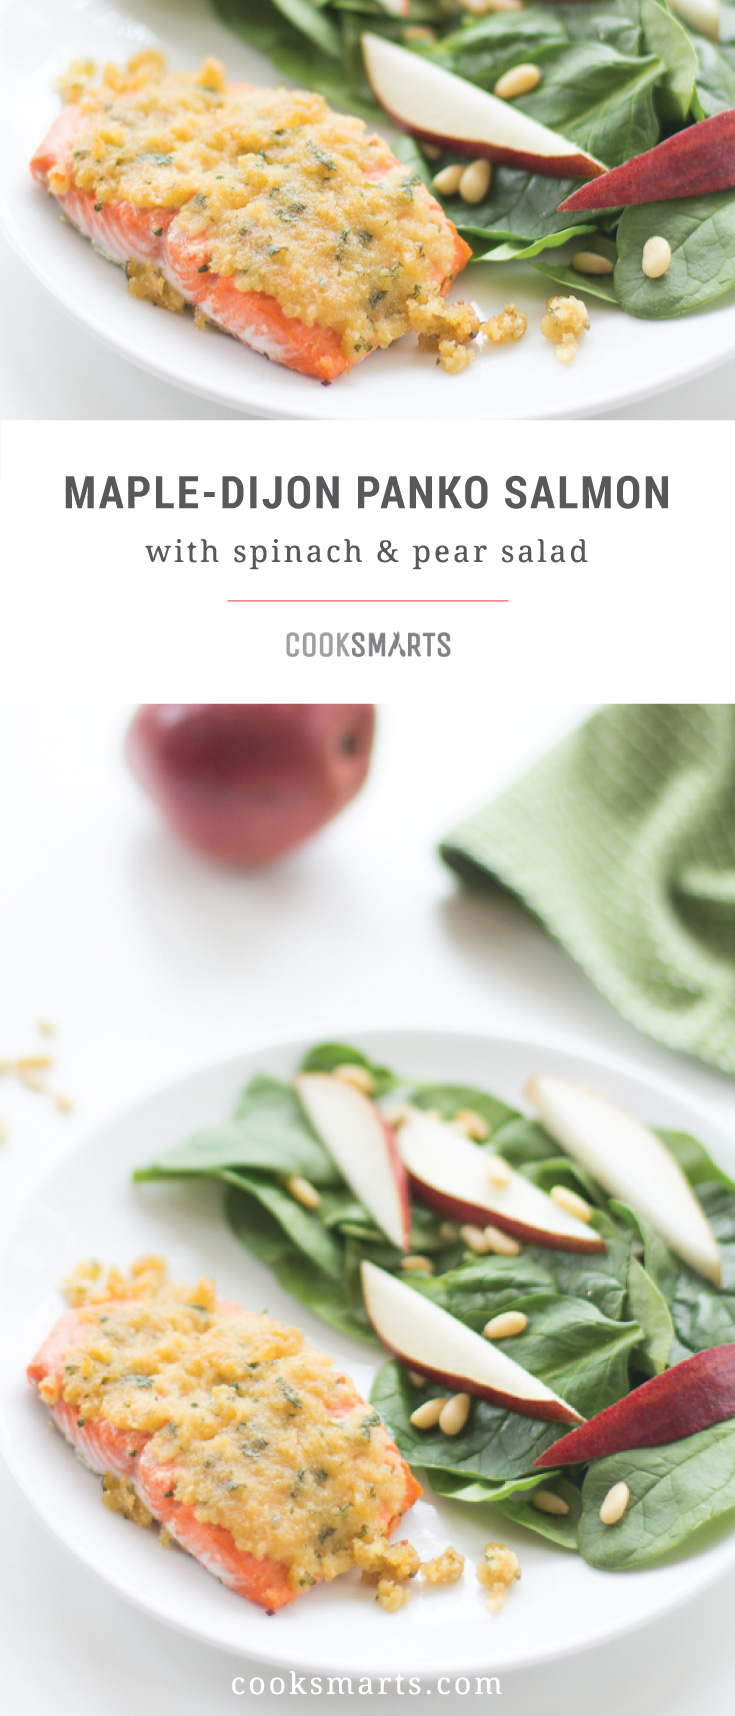 Cook Smarts Recipe: Maple-Dijon Panko Crusted Salmon with Spinach & Pear Salad